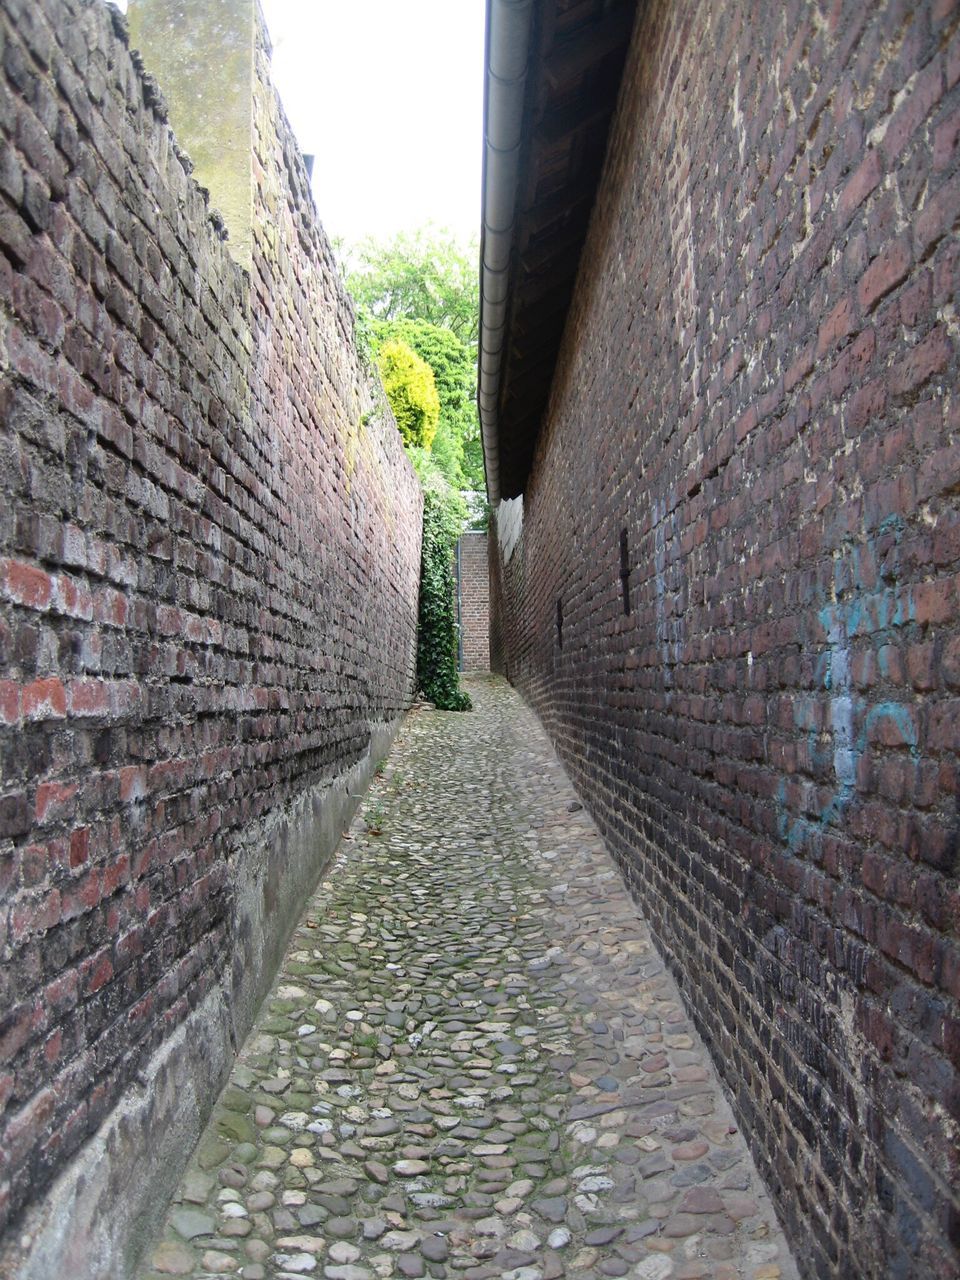 architecture, the way forward, built structure, building exterior, stone wall, diminishing perspective, wall - building feature, brick wall, vanishing point, narrow, footpath, alley, pathway, cobblestone, day, walkway, wall, steps